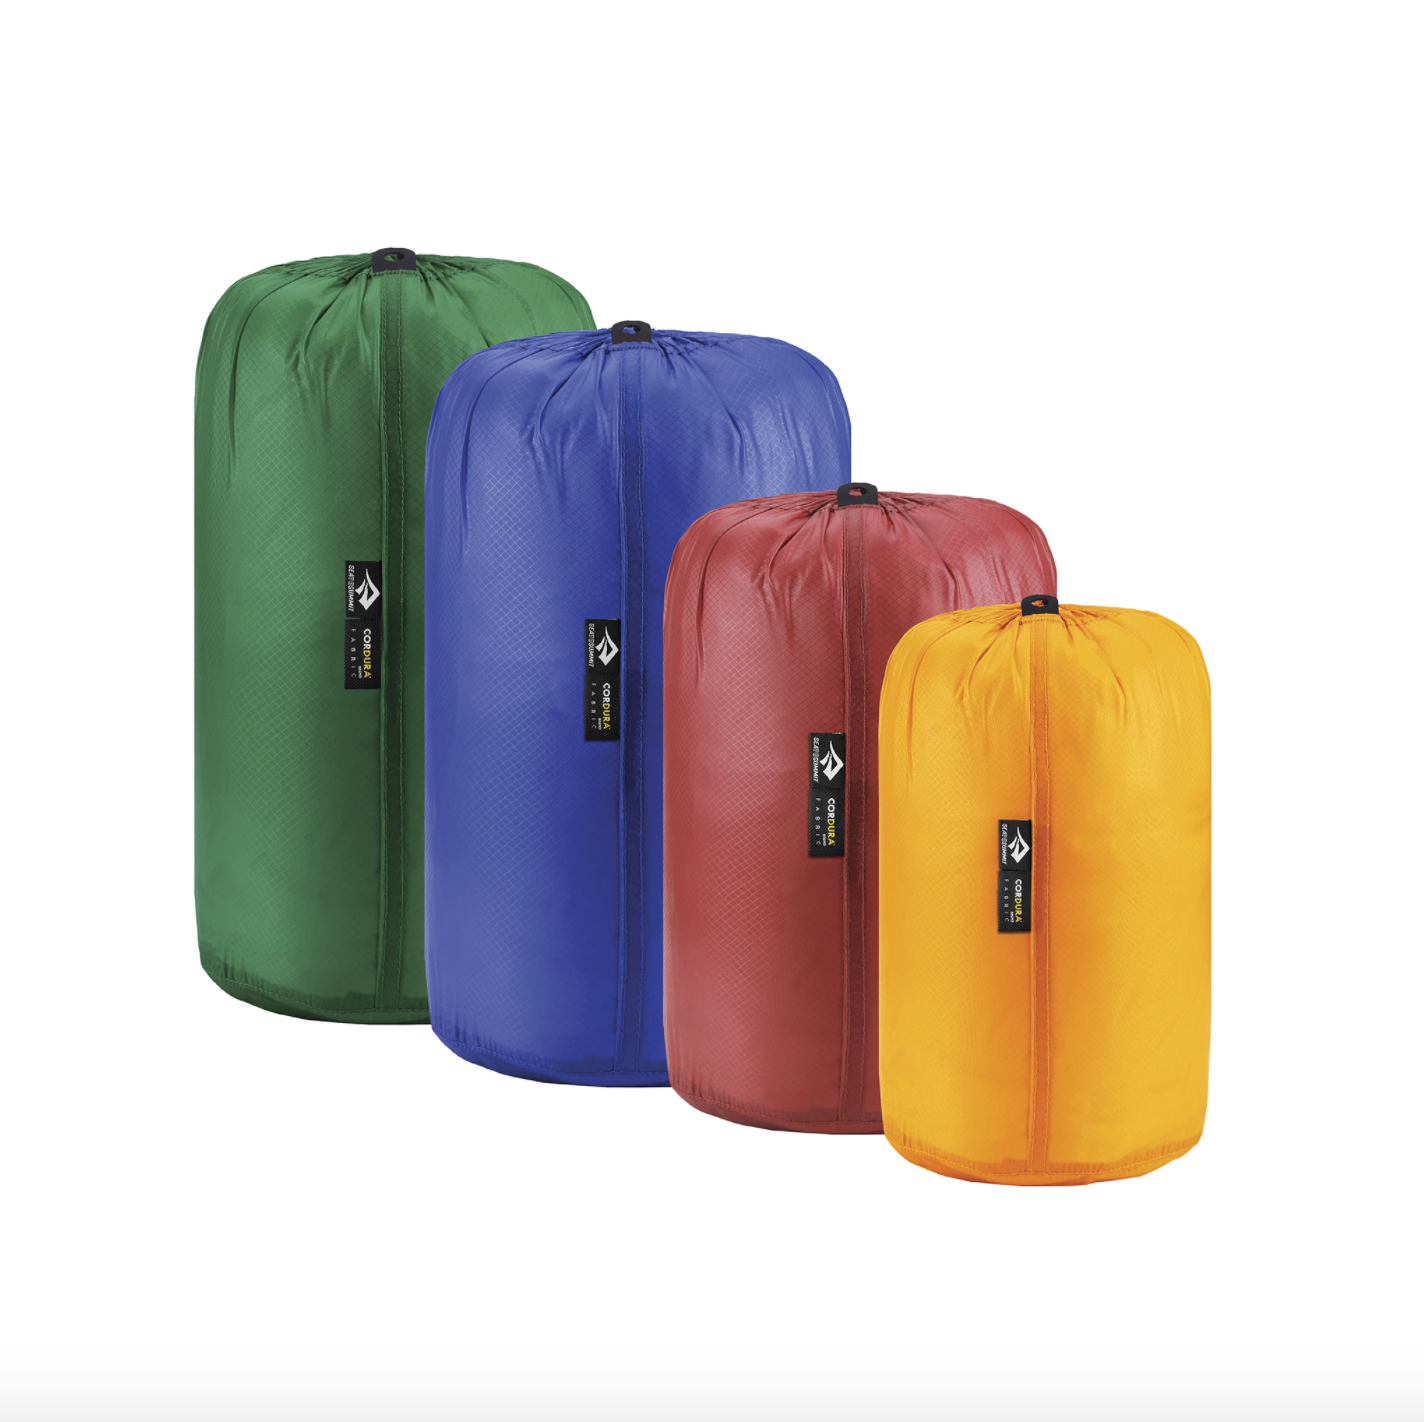 sea to summit ultra-sil stuff sack in assorted colors and sizes